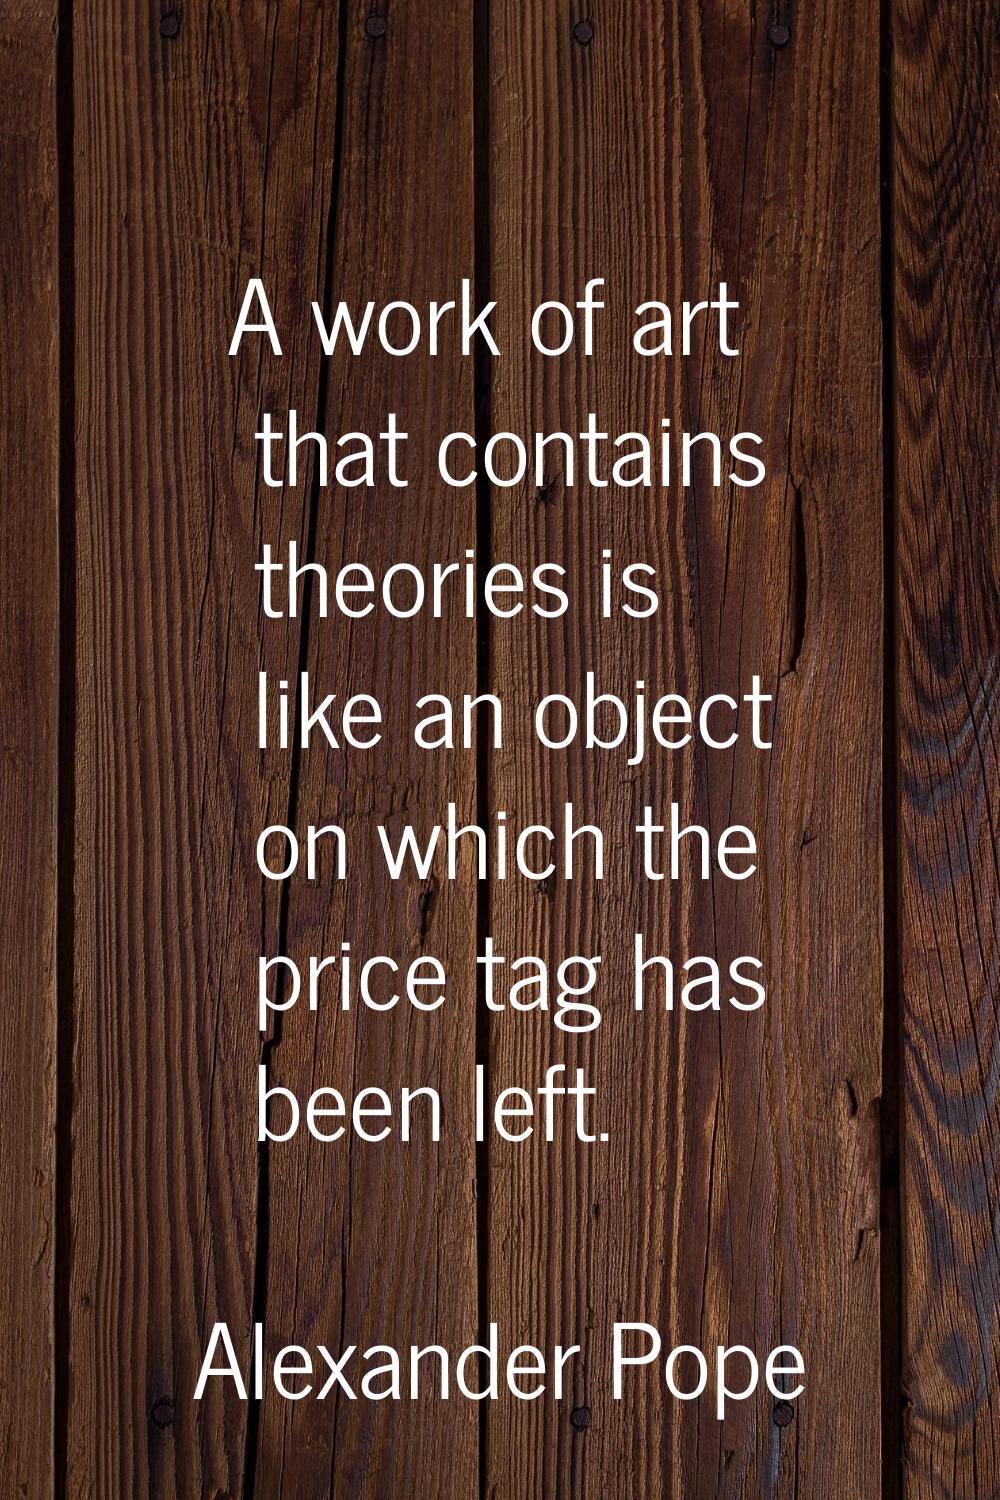 A work of art that contains theories is like an object on which the price tag has been left.